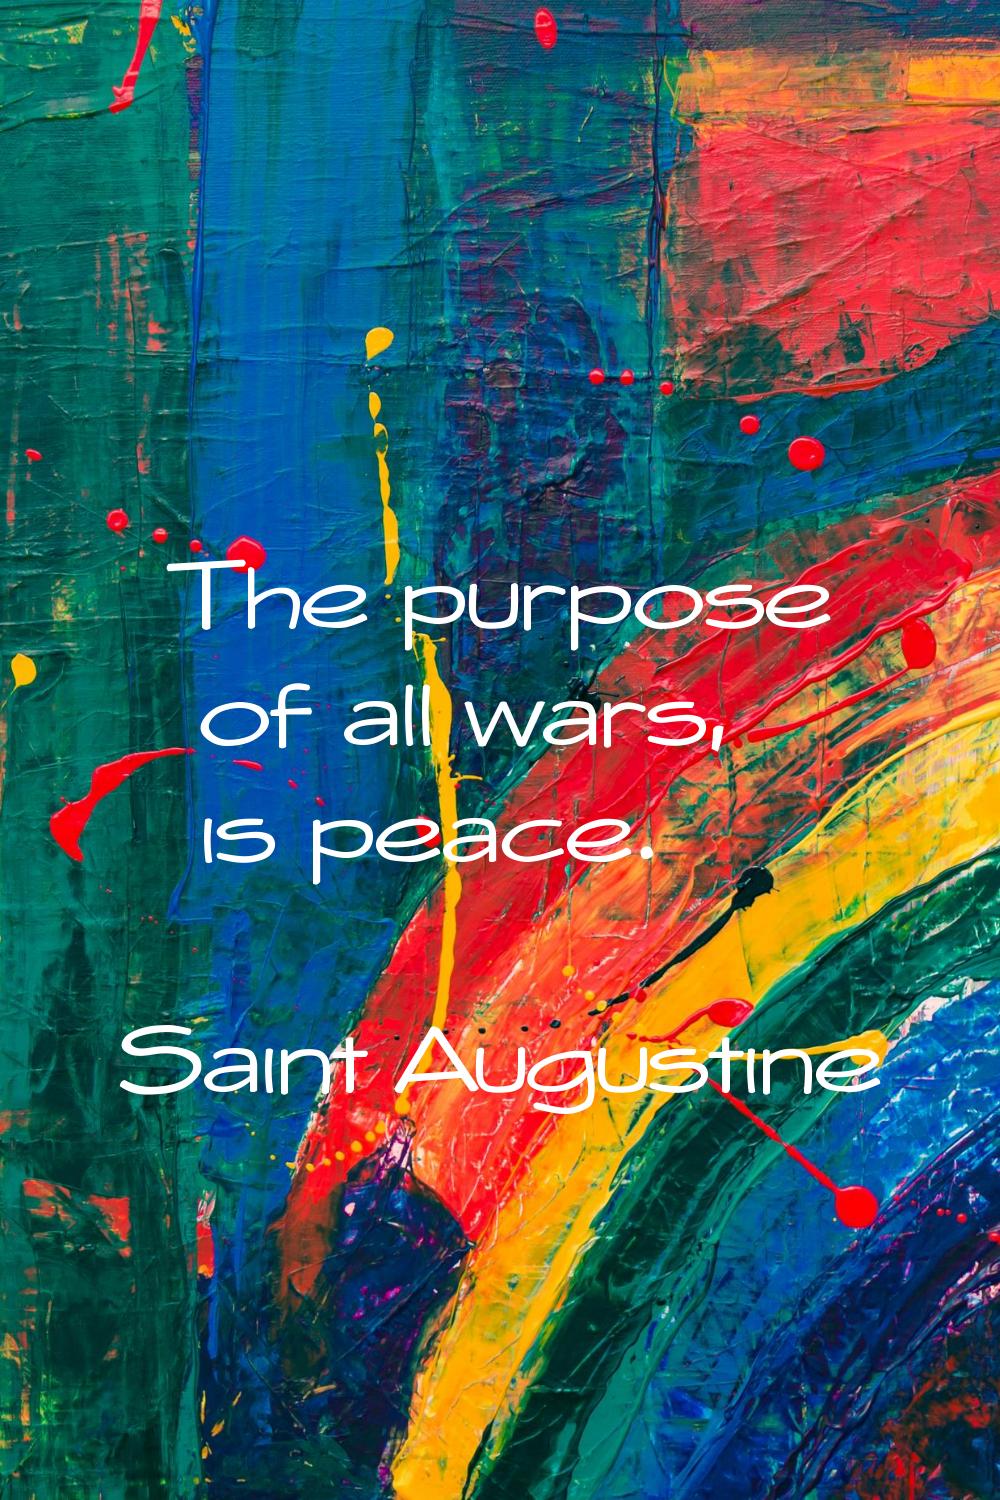 The purpose of all wars, is peace.